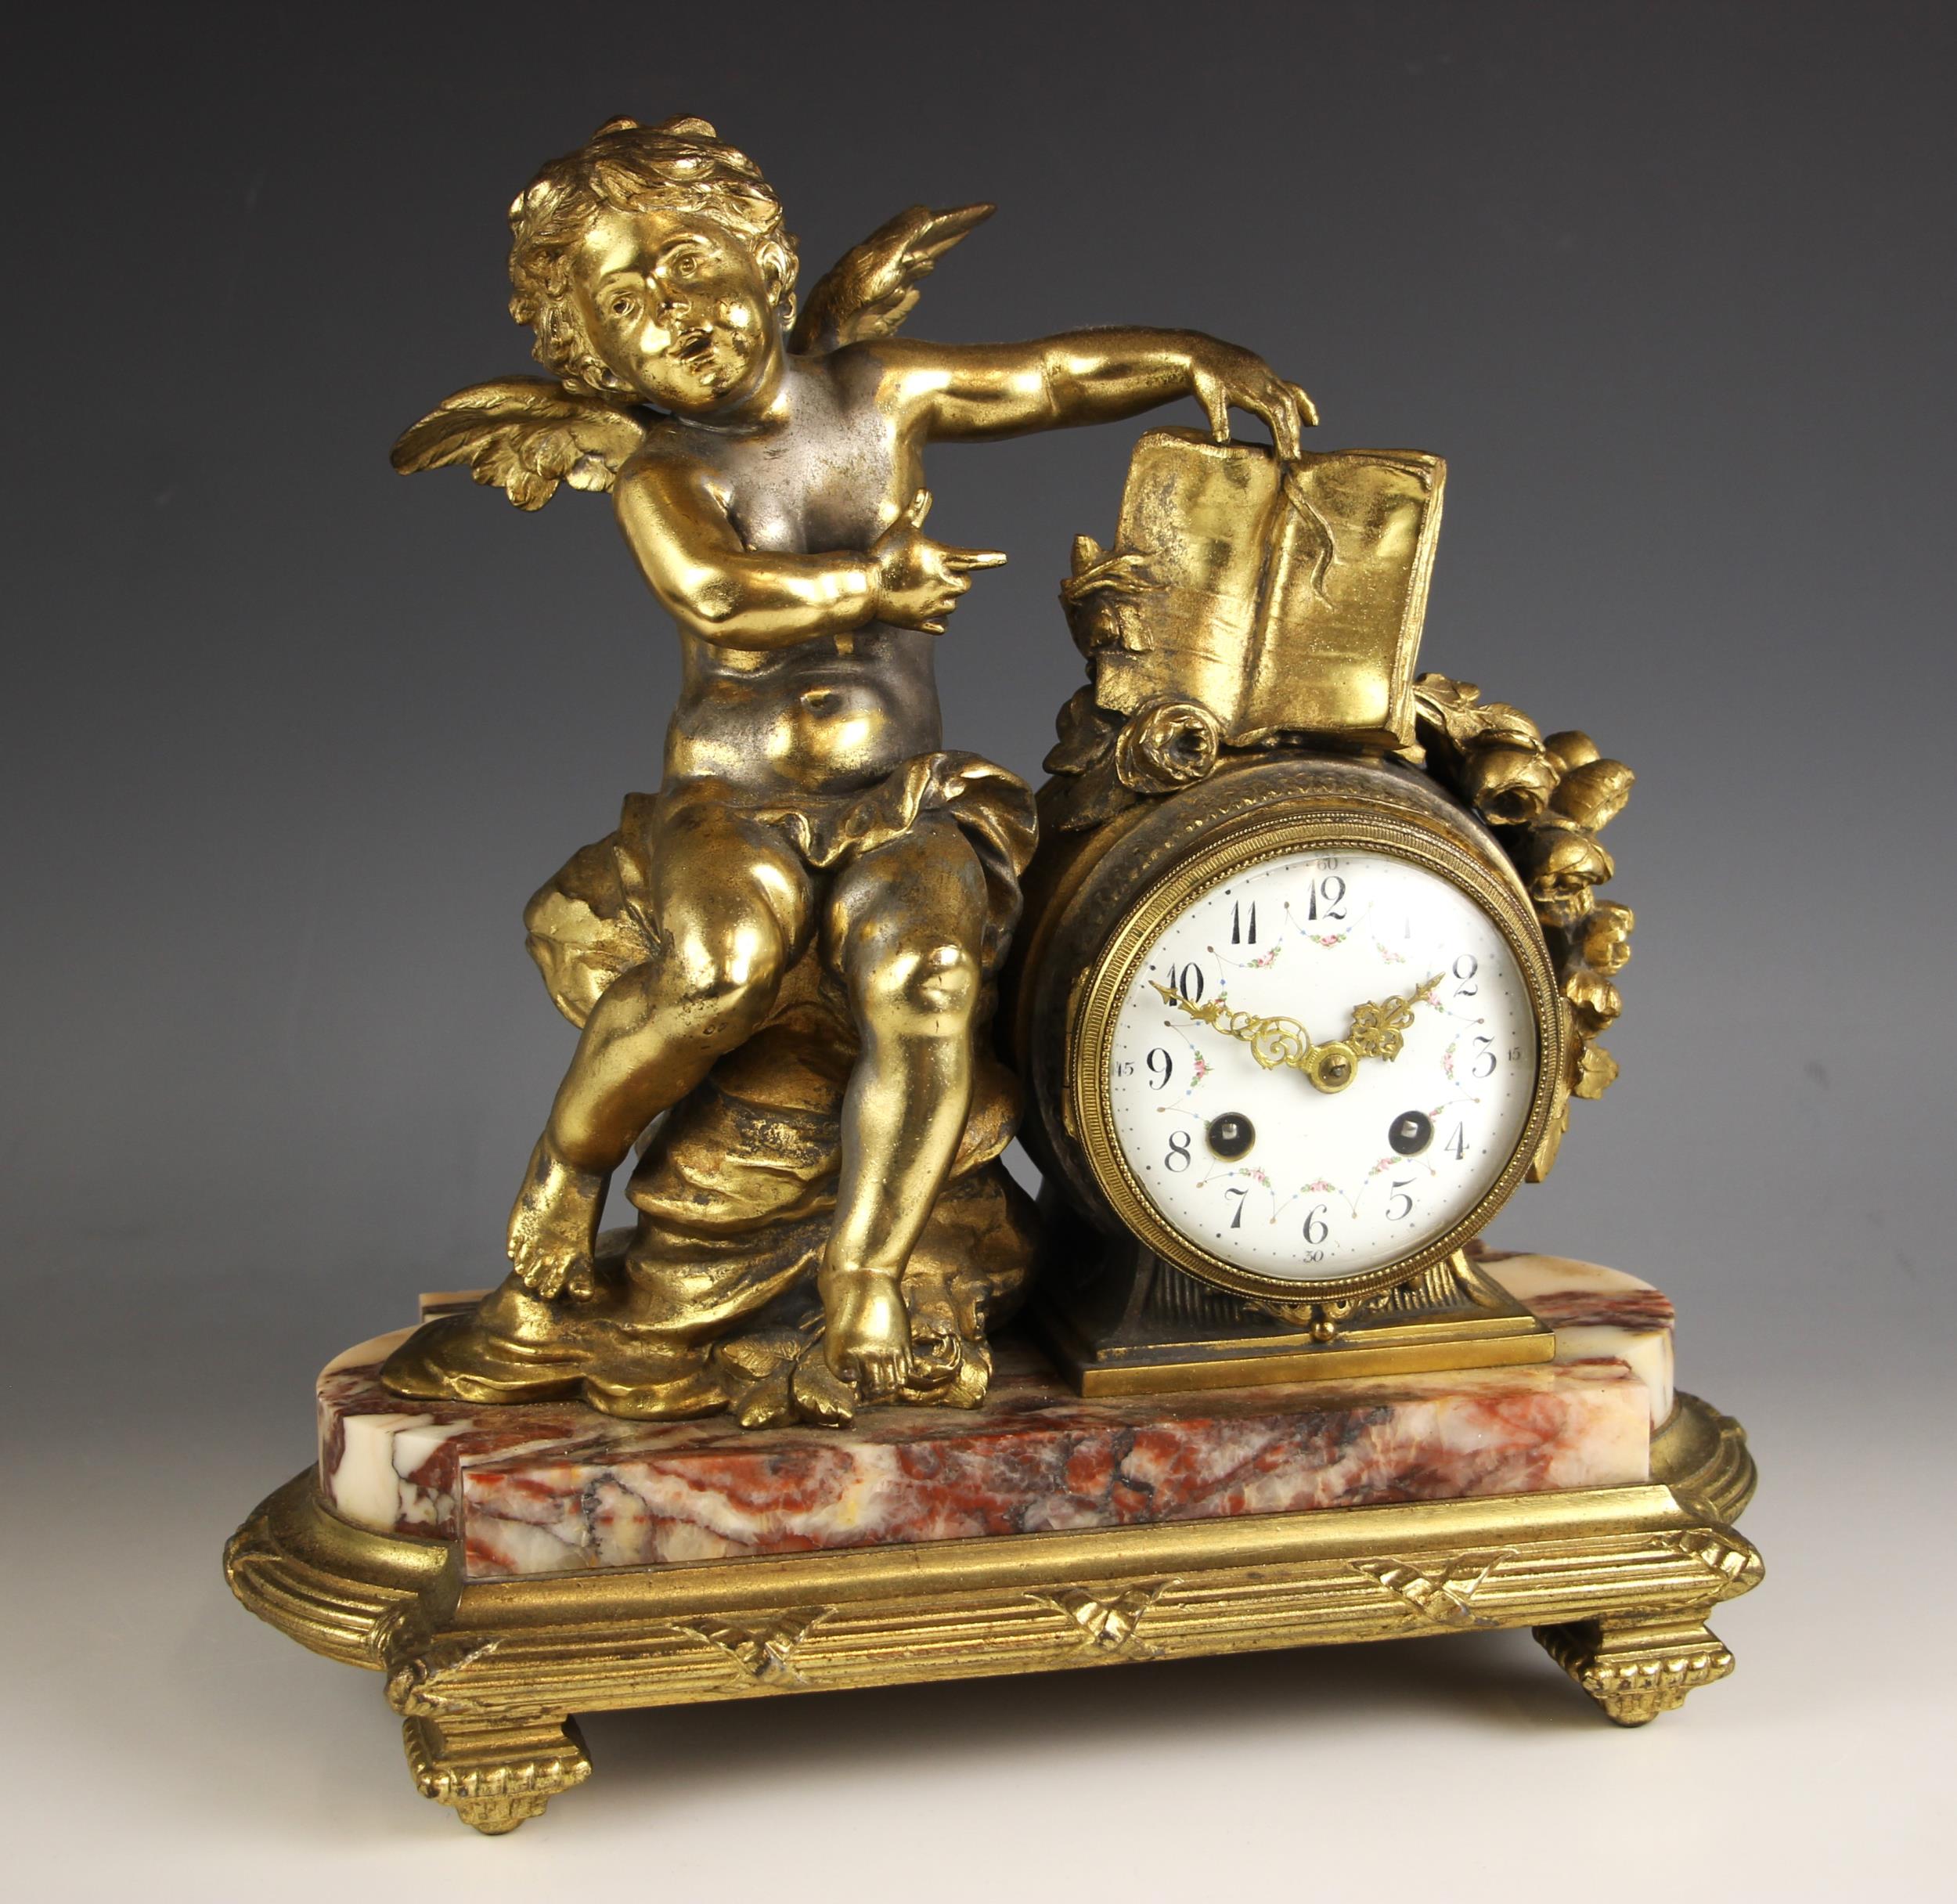 A French gilt metal and rouge marble mantel clock, late 19th century, the case surmounted with a